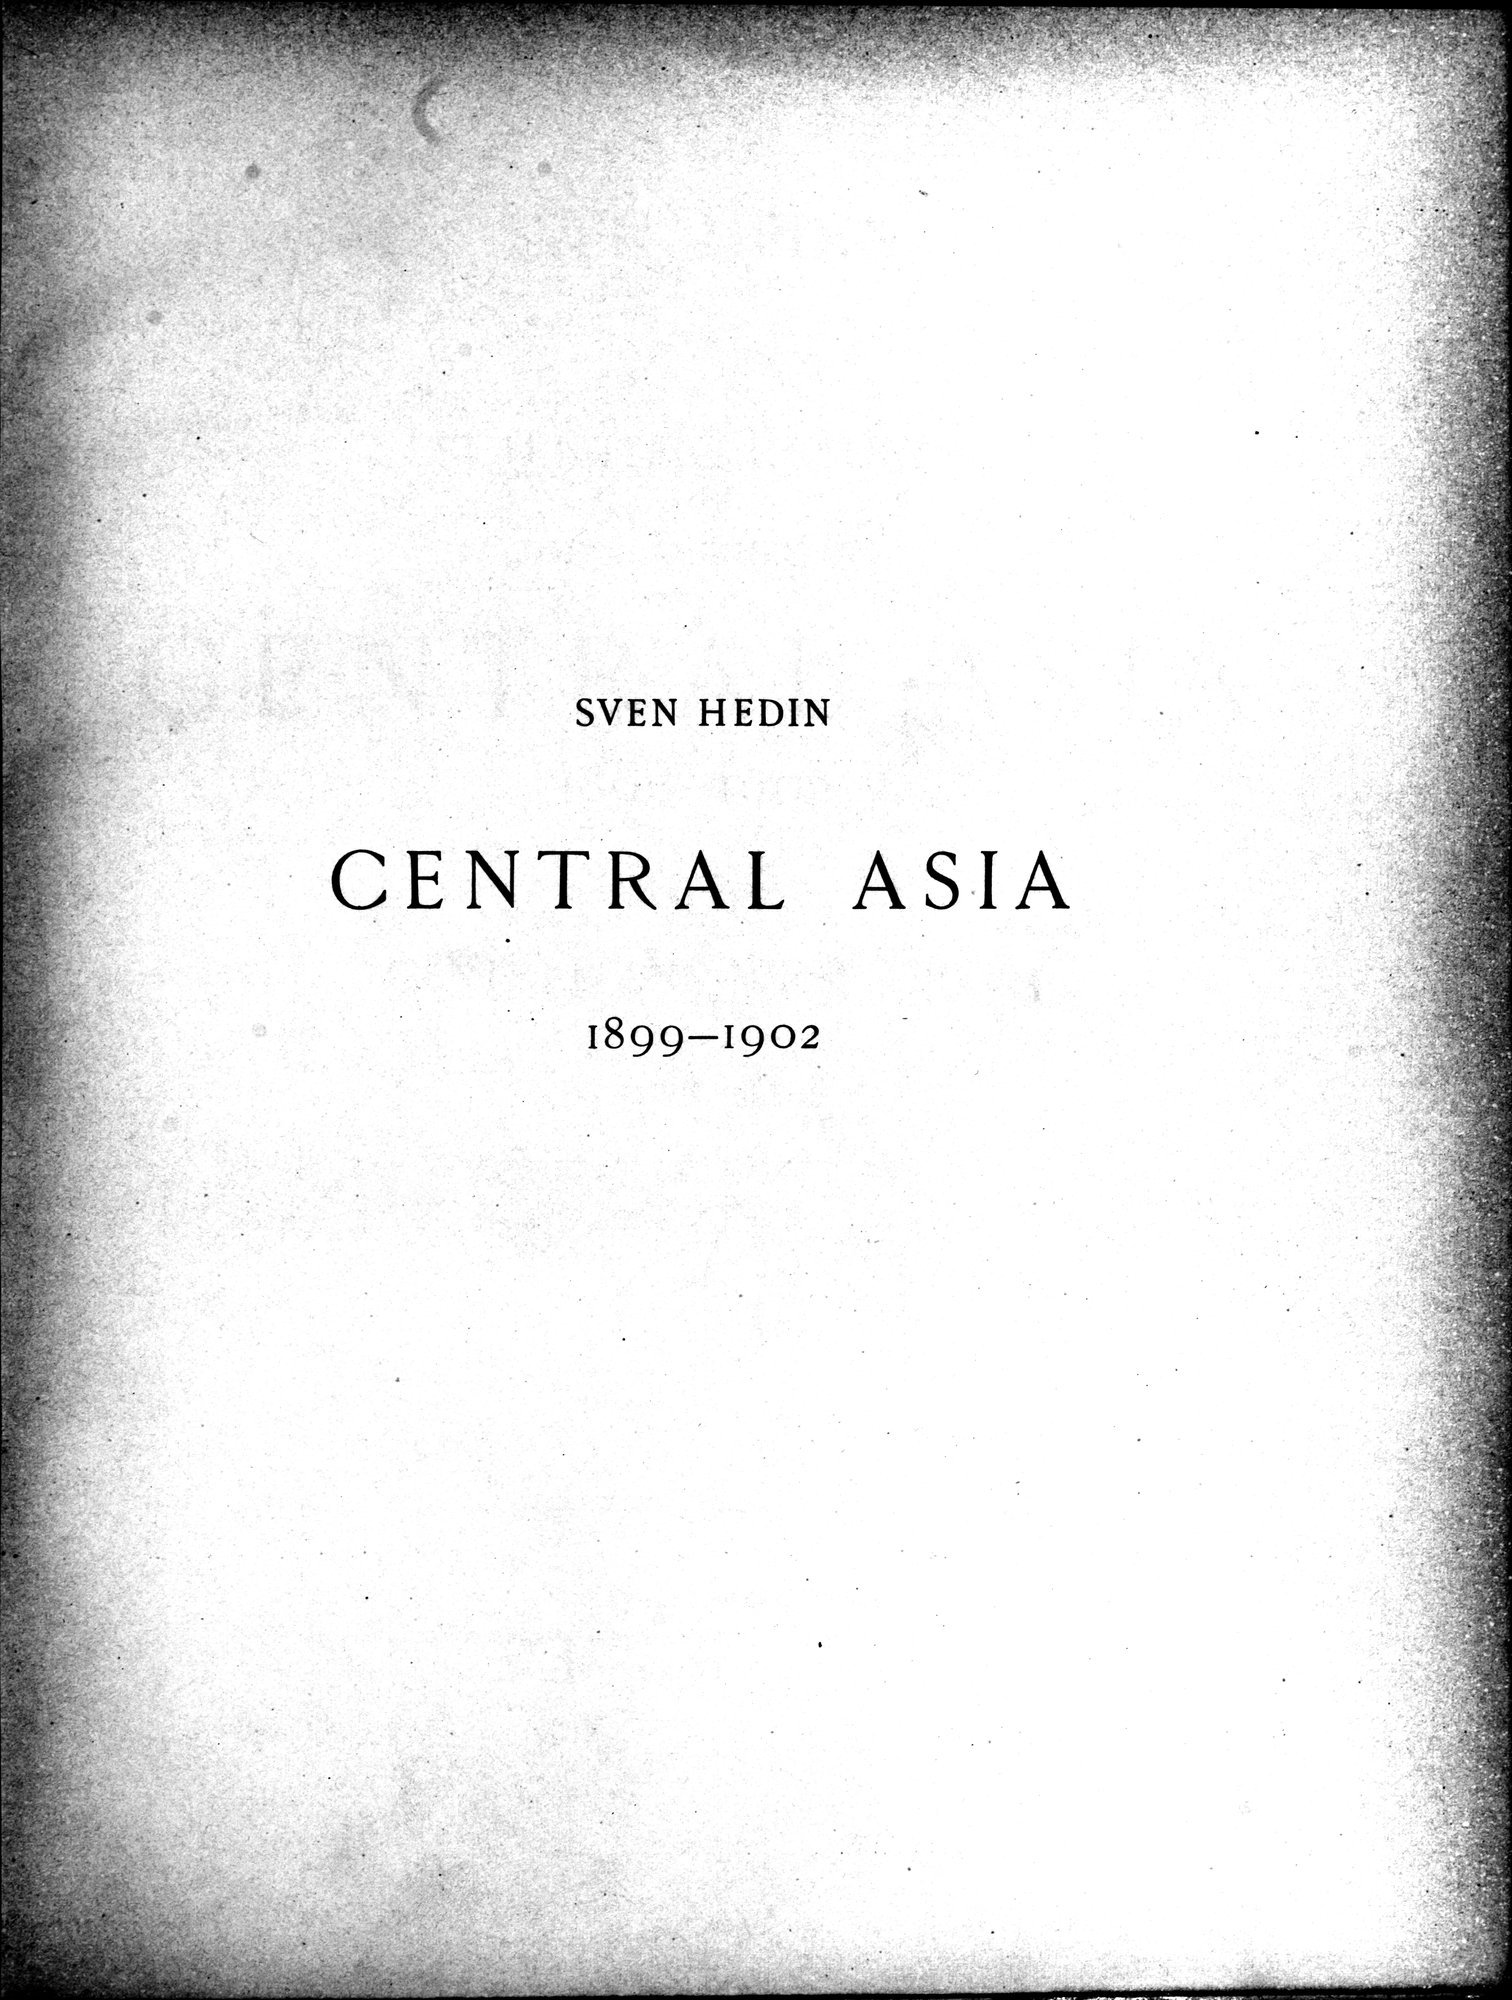 Scientific Results of a Journey in Central Asia, 1899-1902 : vol.4 / 7 ページ（白黒高解像度画像）